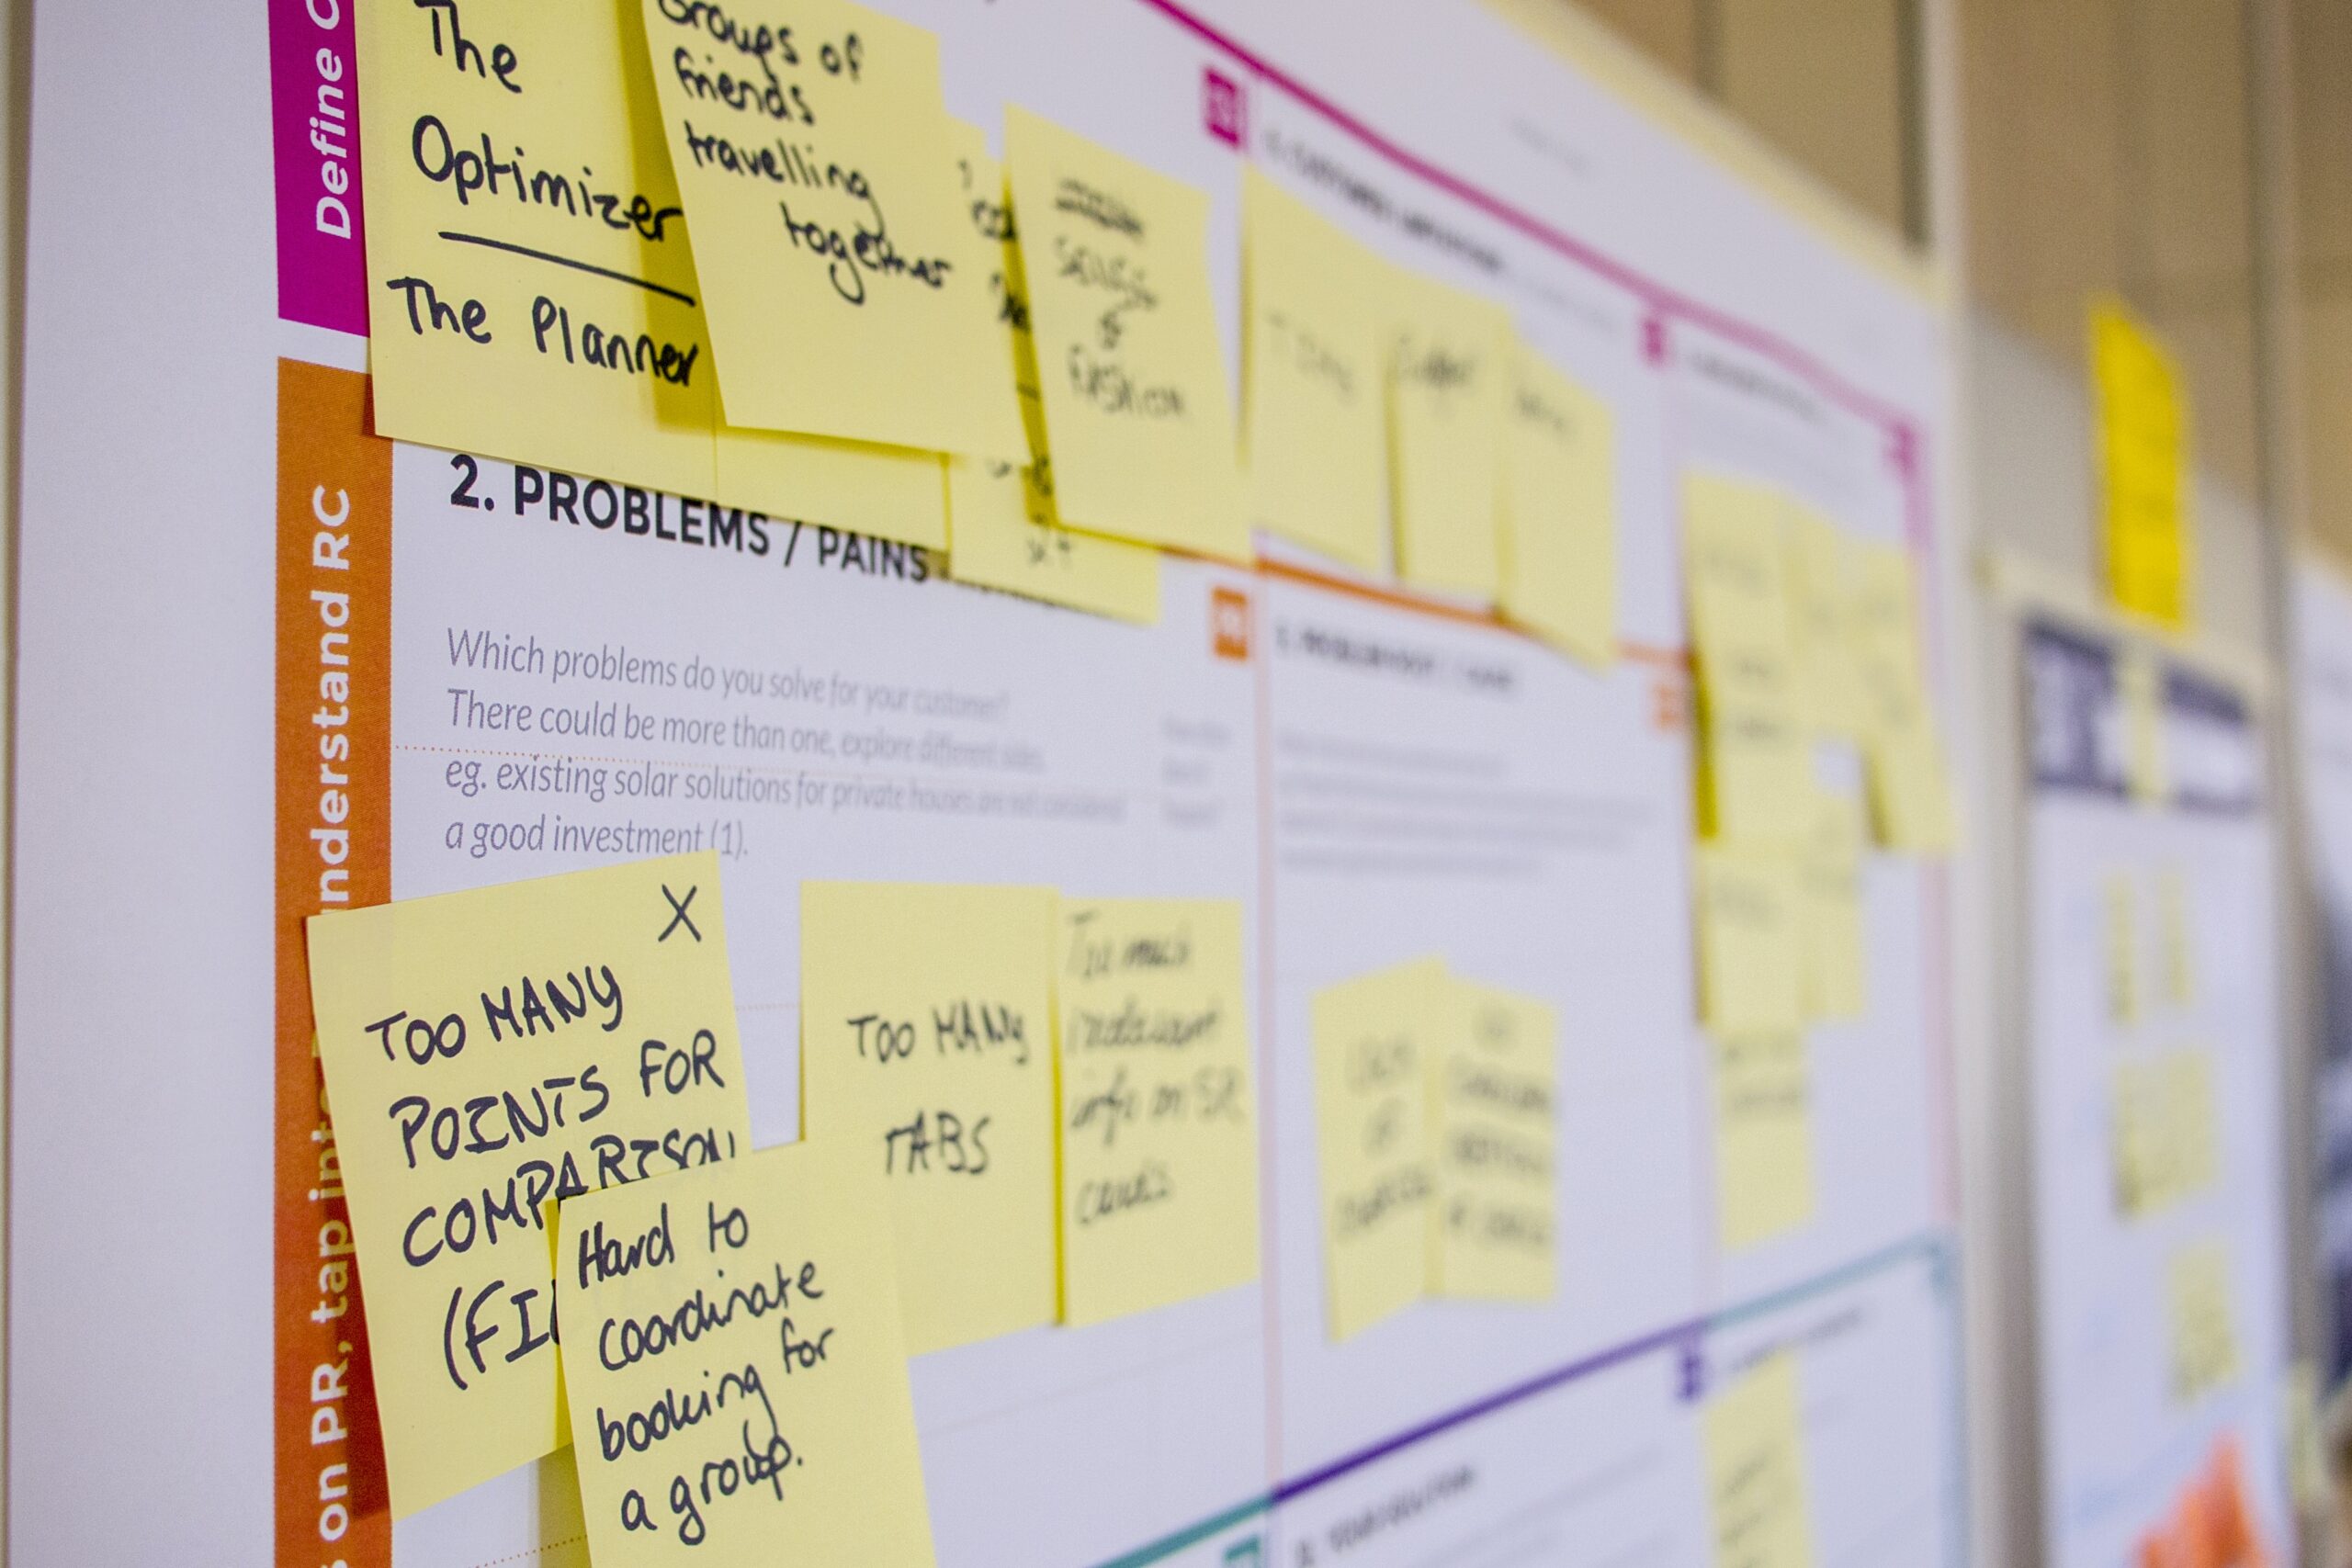 A board full of yellow notes representing Agile Practice. Photo by Daria Nepriakhina 🇺🇦 on Unsplash